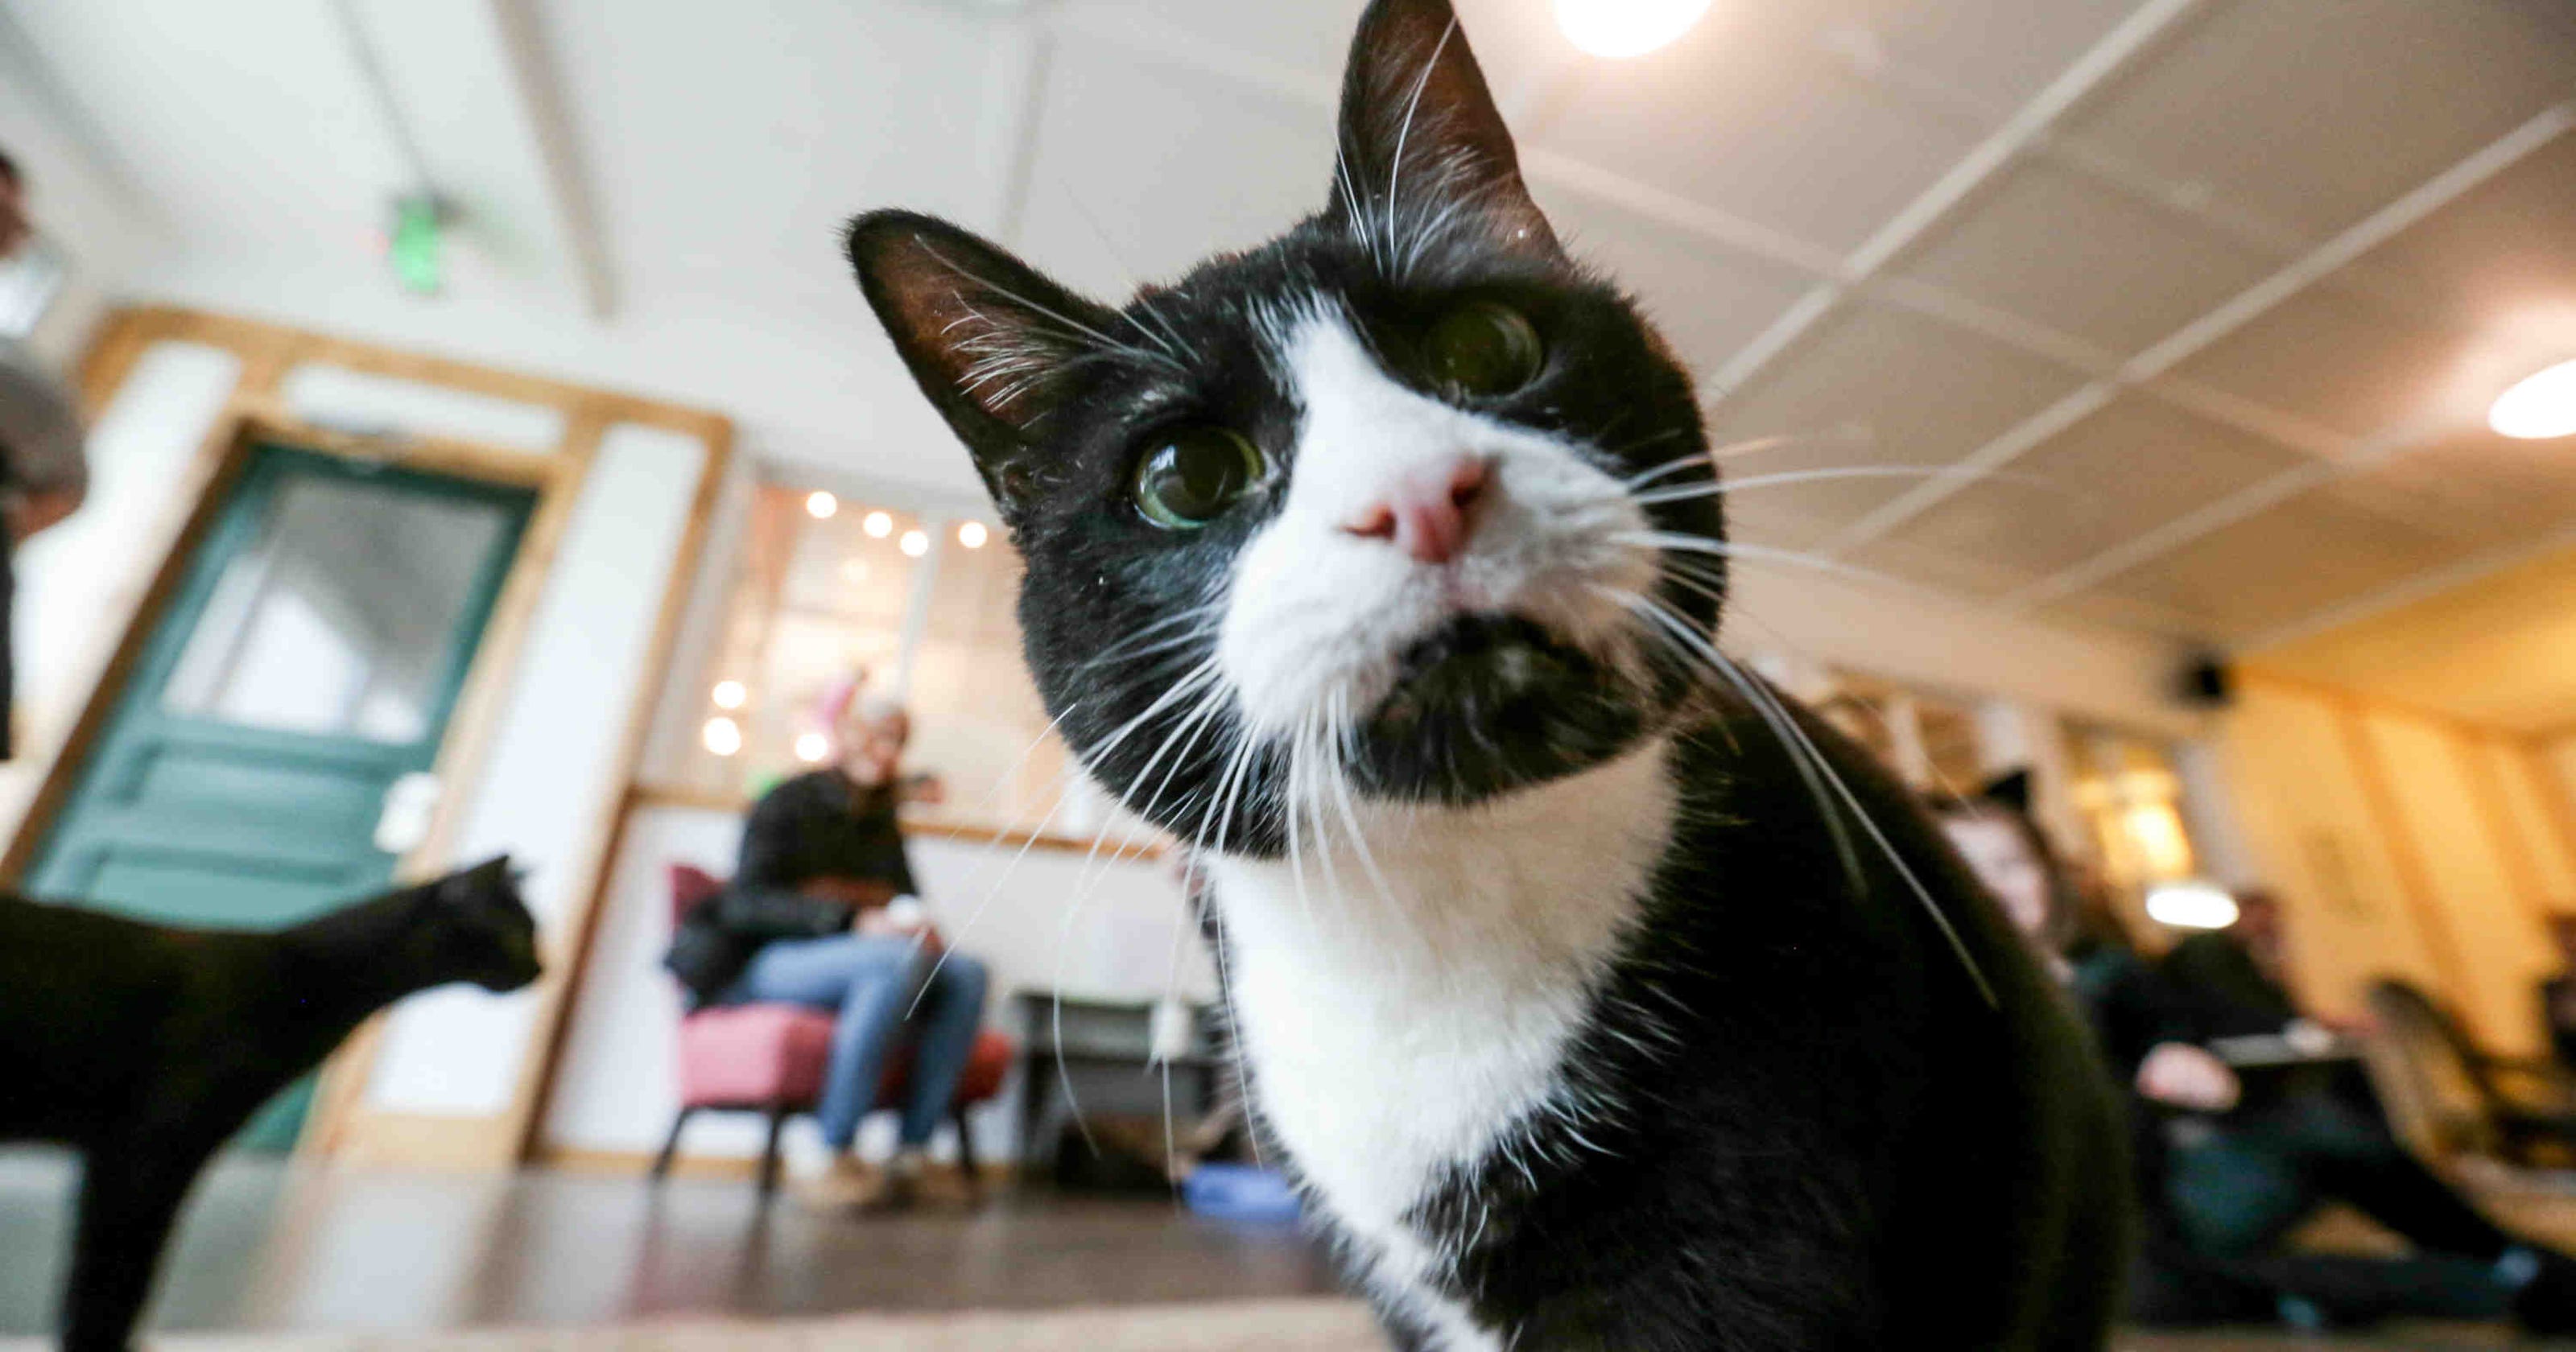 Could Lafayette get a cat cafe?